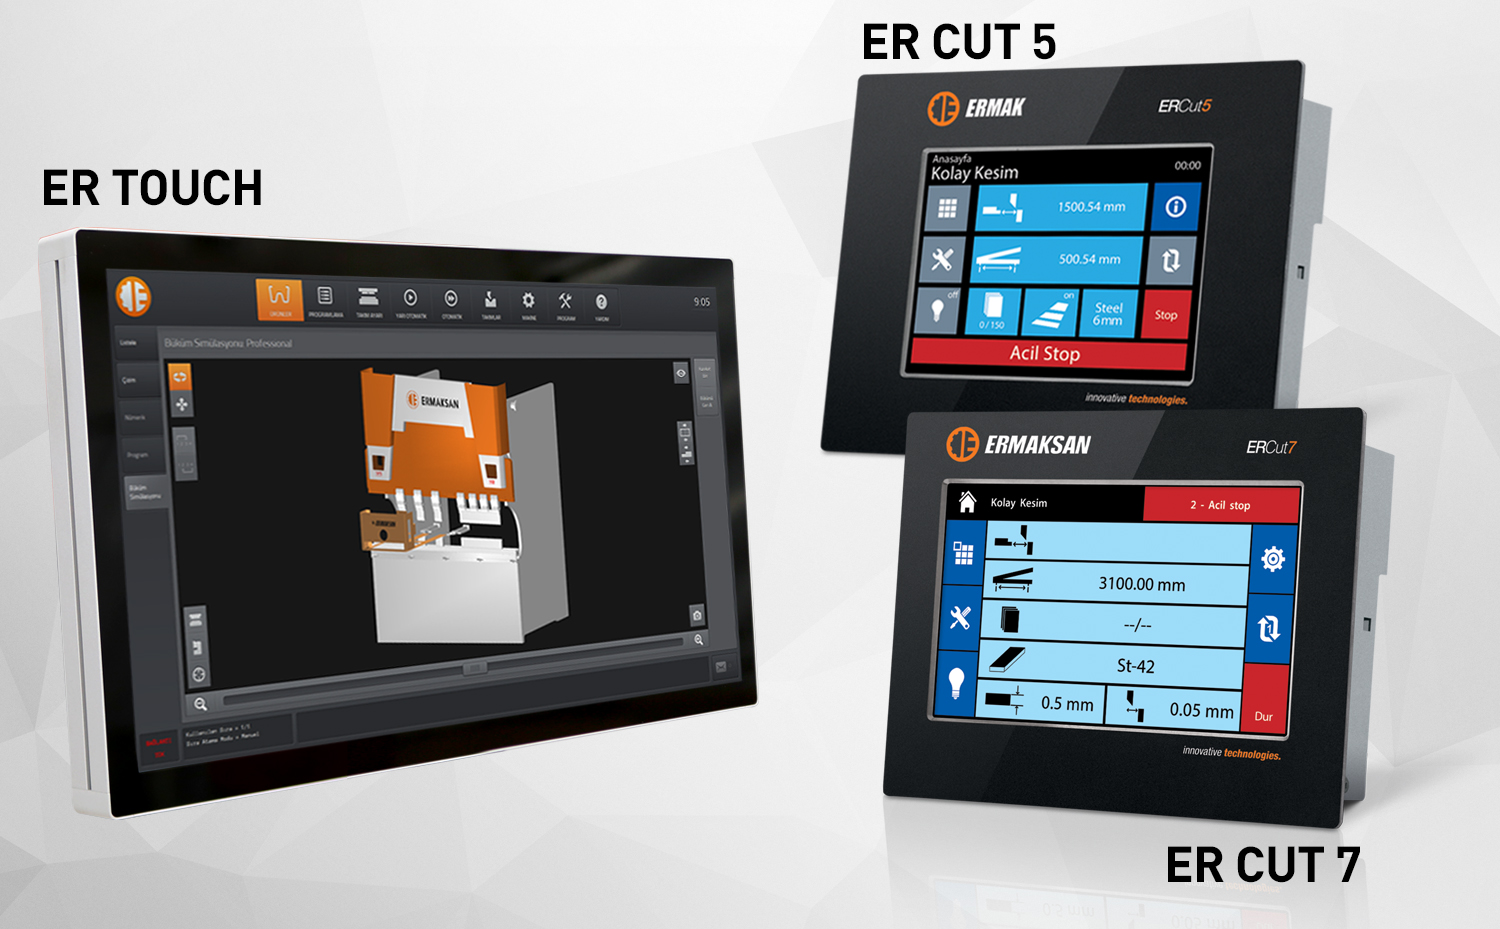 New developments on ER TOUCH and ER CUT controllers